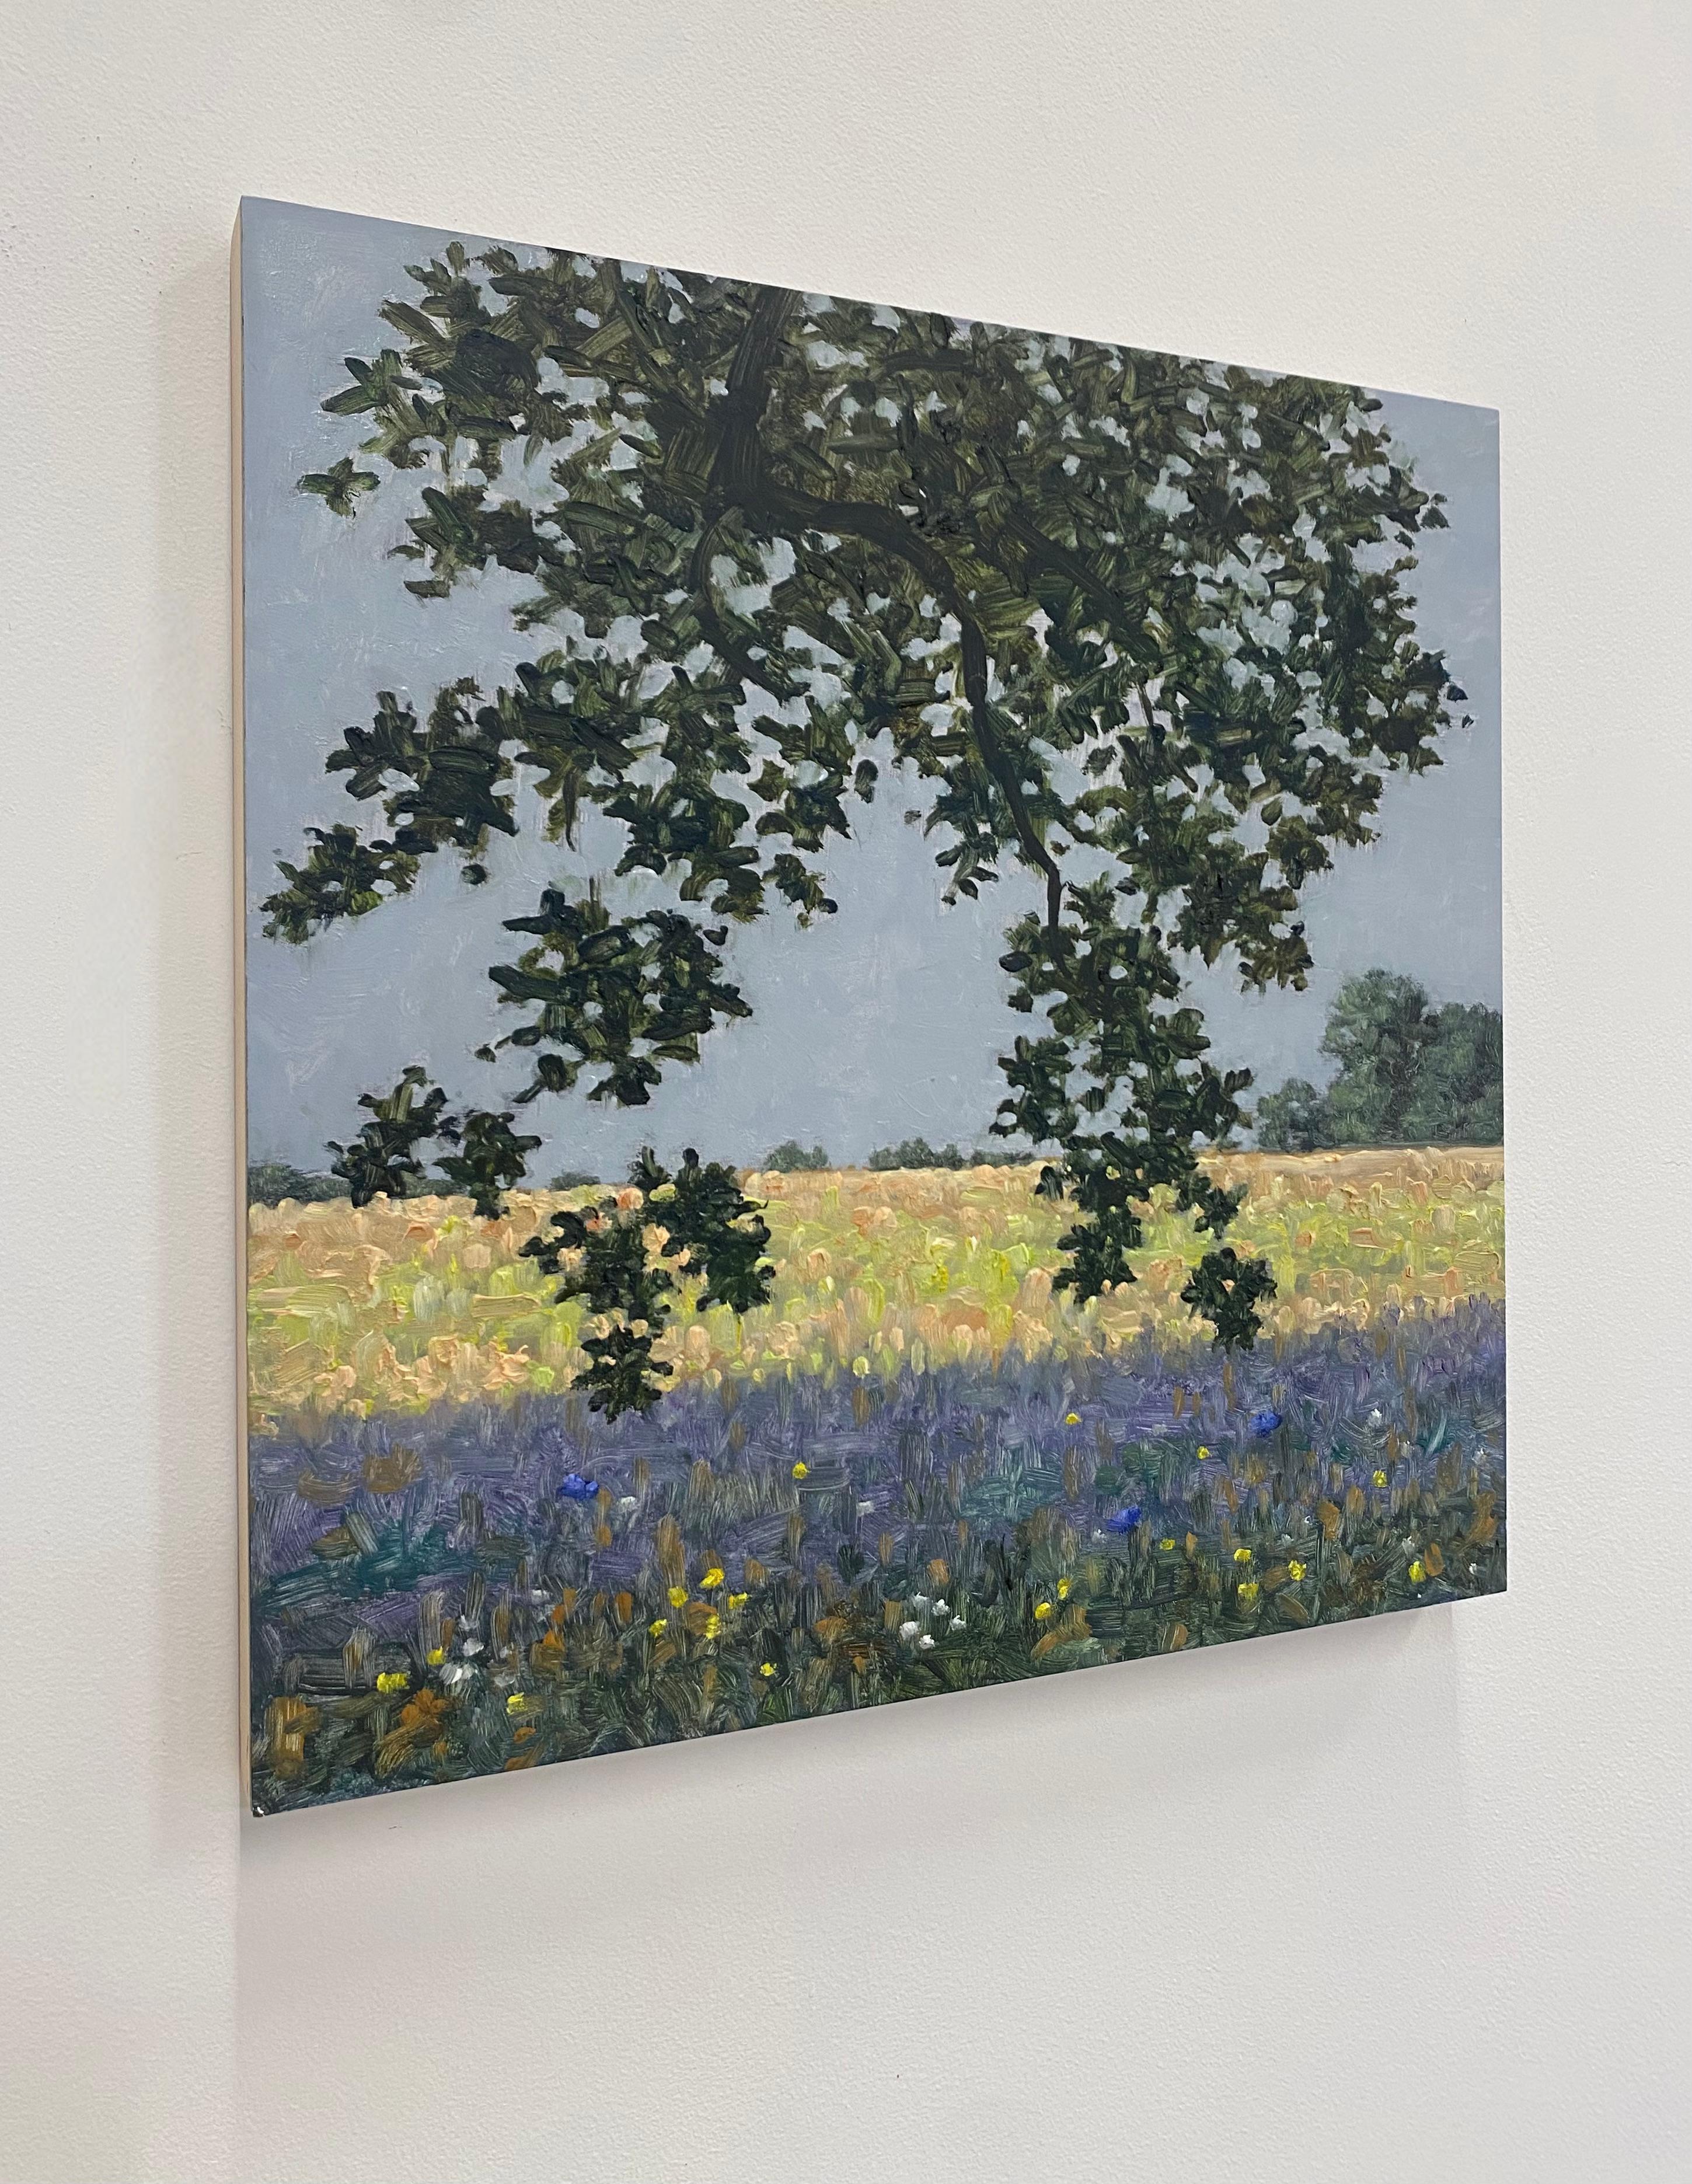 A peaceful outdoor scene in summer of delicately painted violet blue flowers in a green grassy field beneath a tree with dark green leaves, beautifully capturing the idyllic feel of a field of wildflowers in early July. Signed, dated and titled on